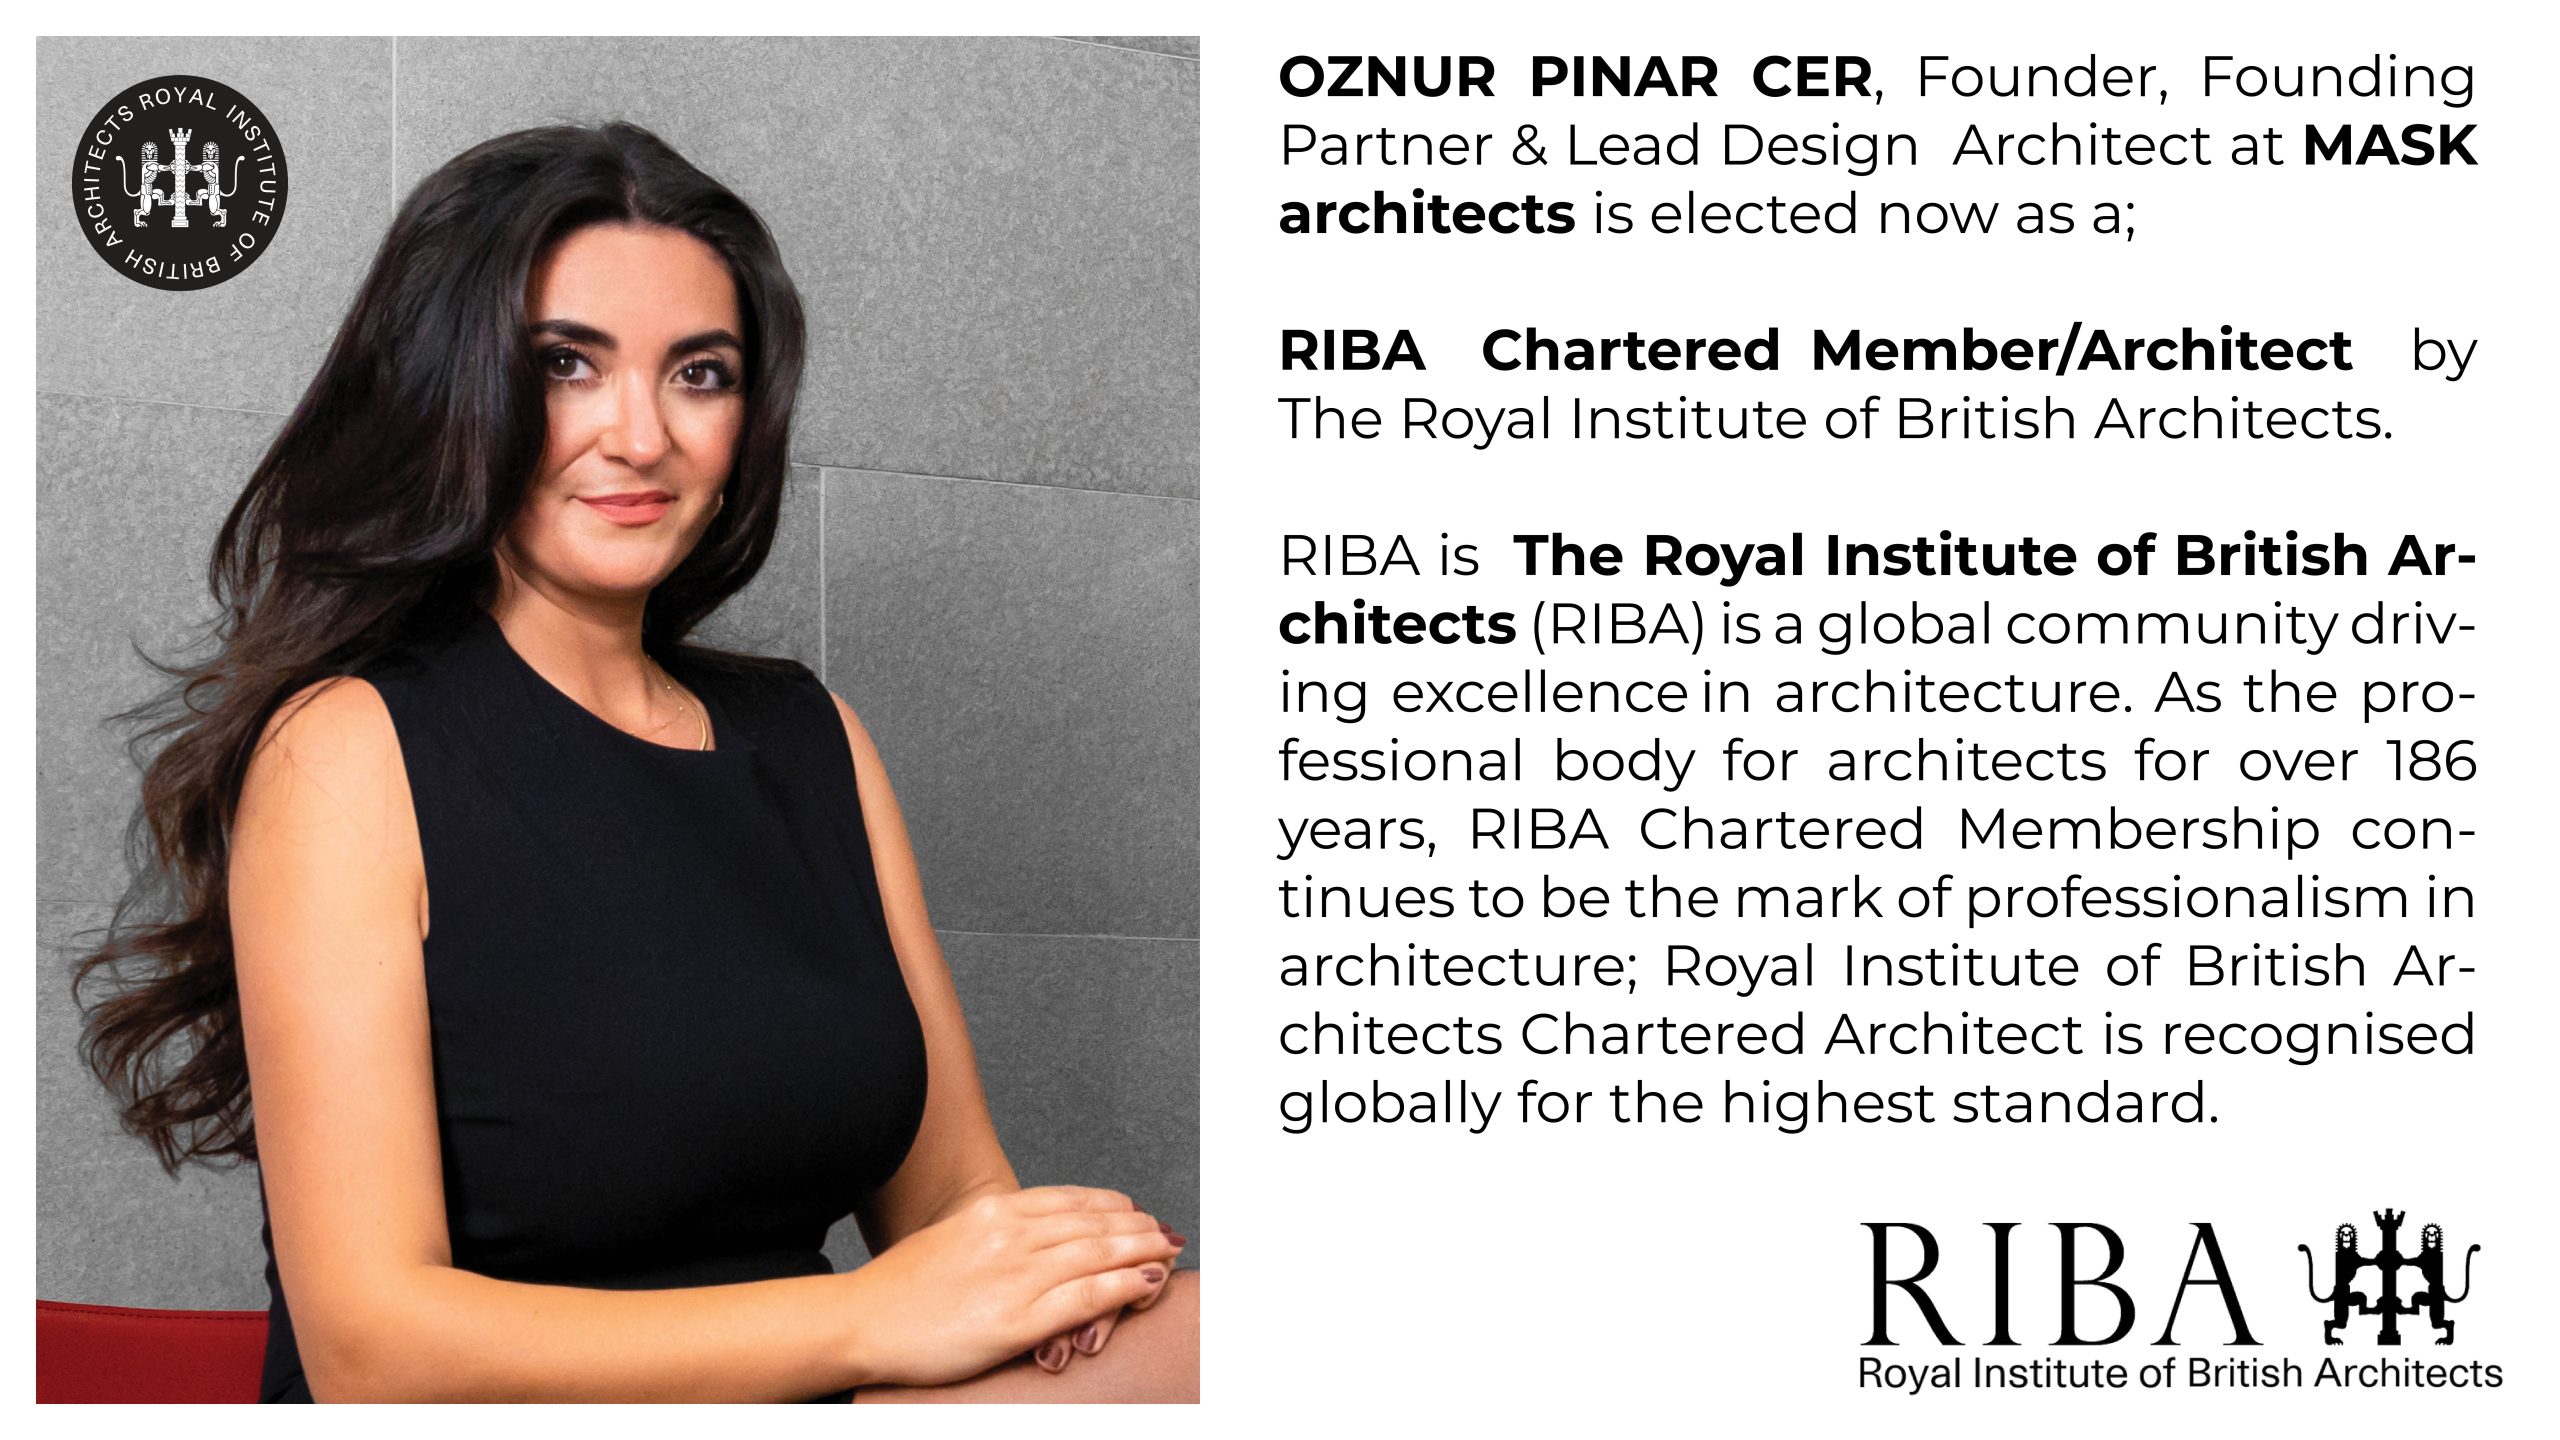 OZNUR PINAR CER, Founder, Founding  Partner and Lead Design Architect at MASK architects is elected now as a;  RIBA Chartered Member/Architect.